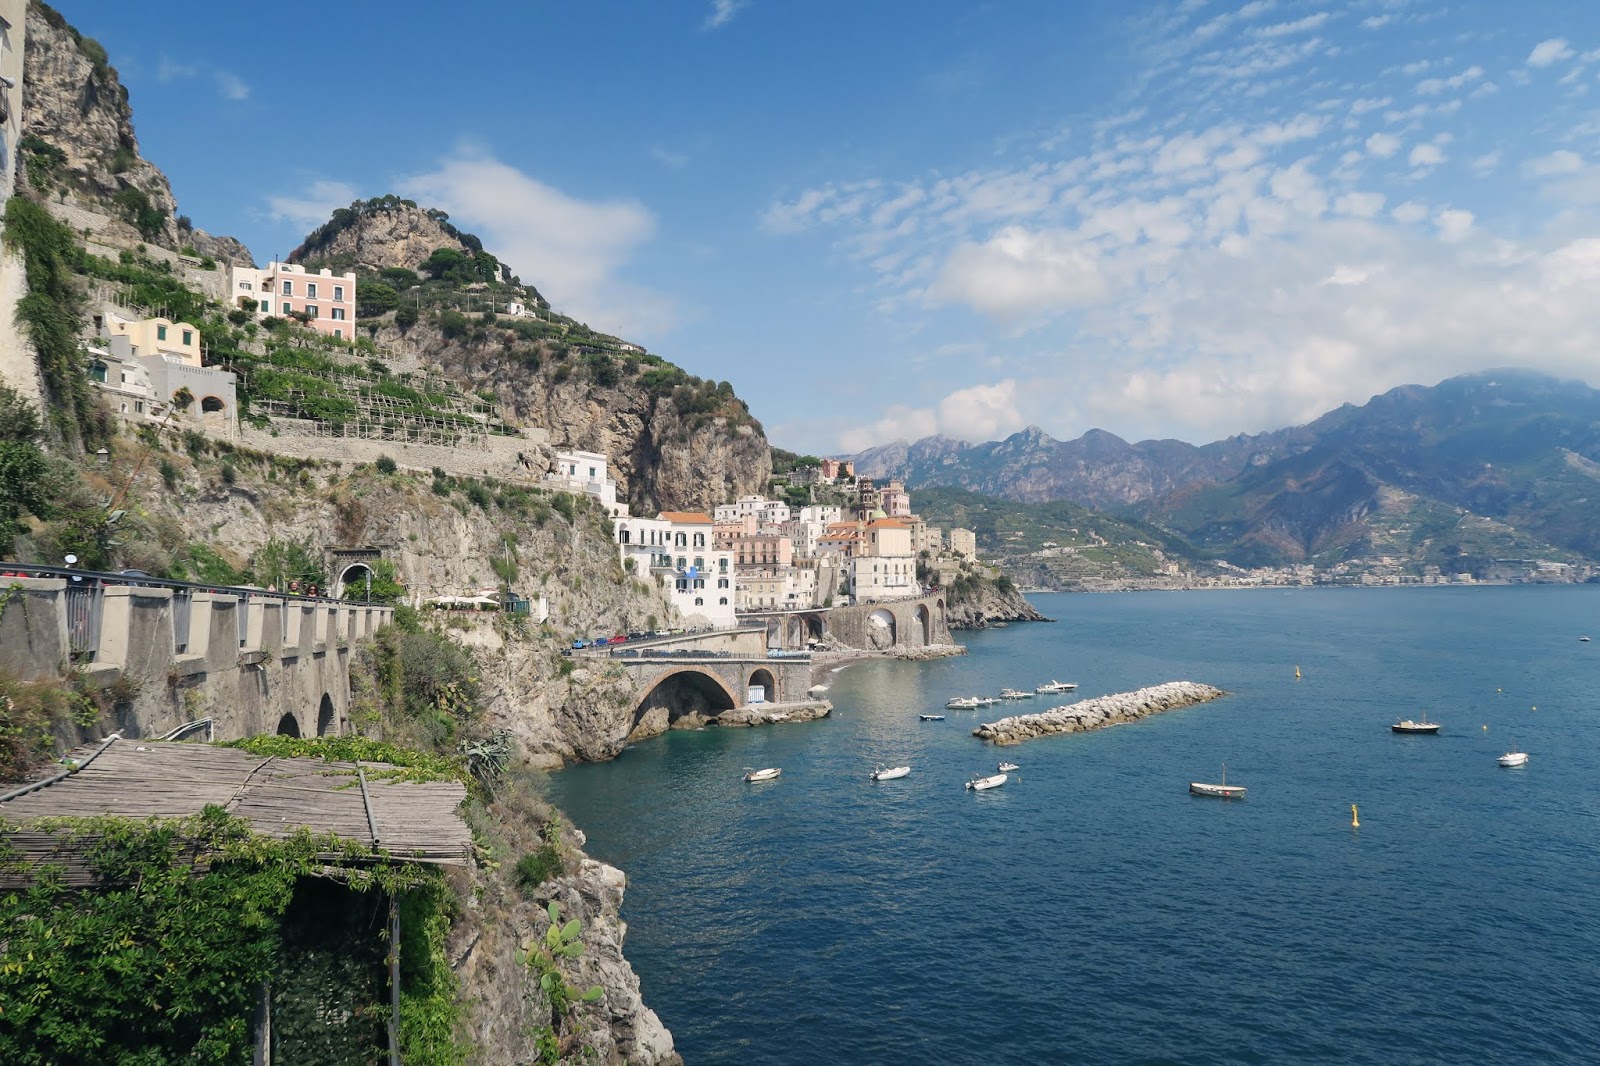 Photo of the town of Amalfi and the ocean